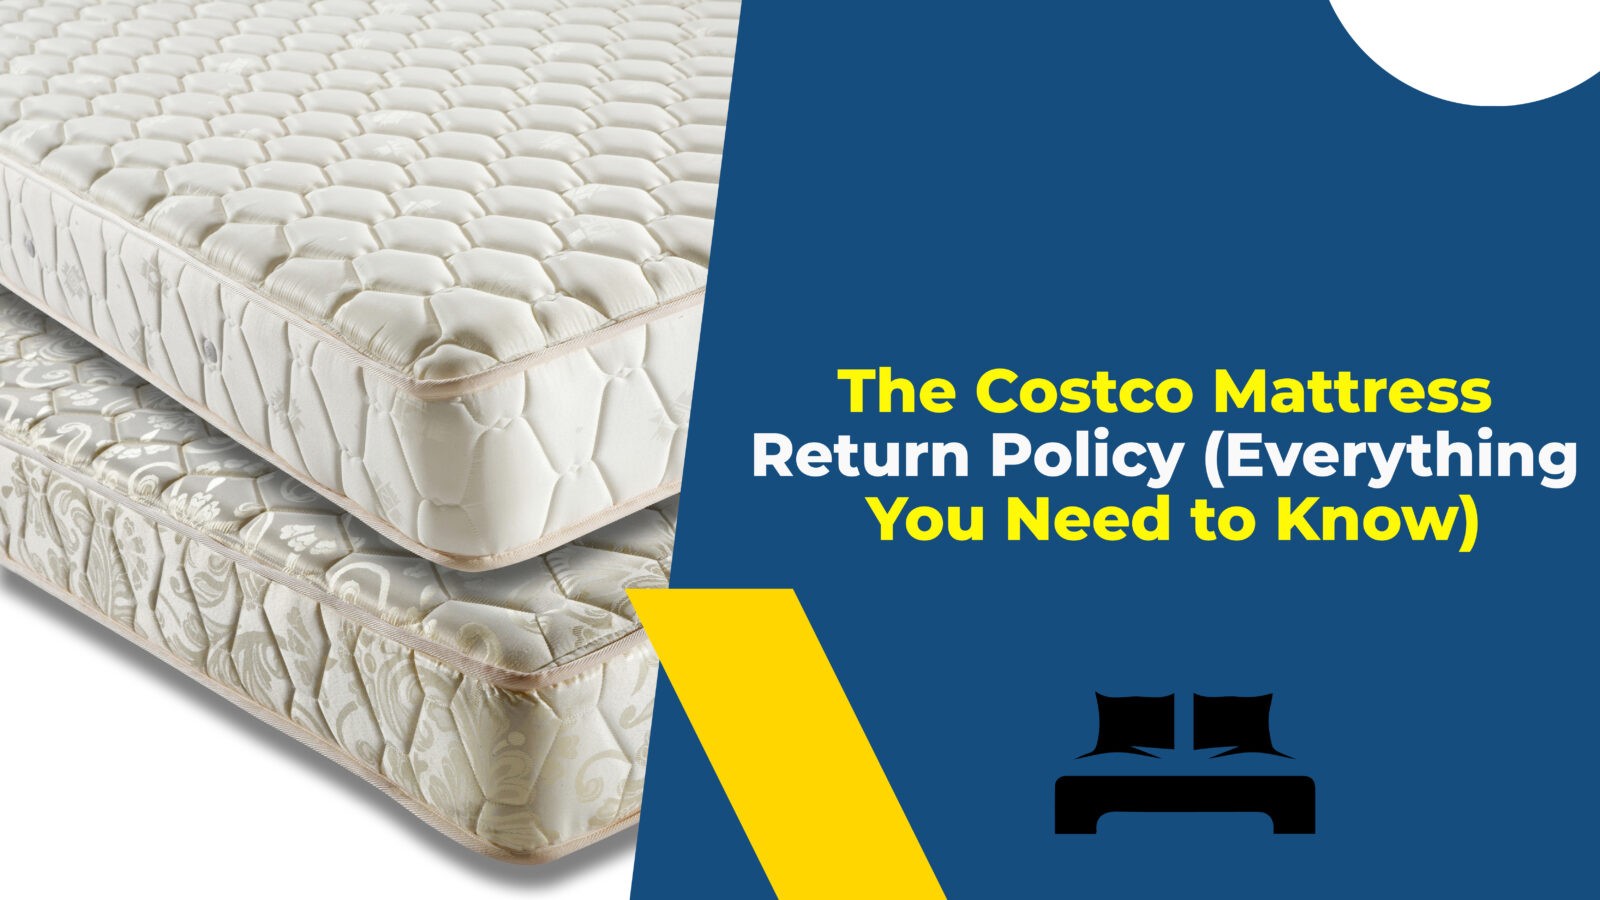 The Costco Mattress Return Policy (Everything You Need To Know)